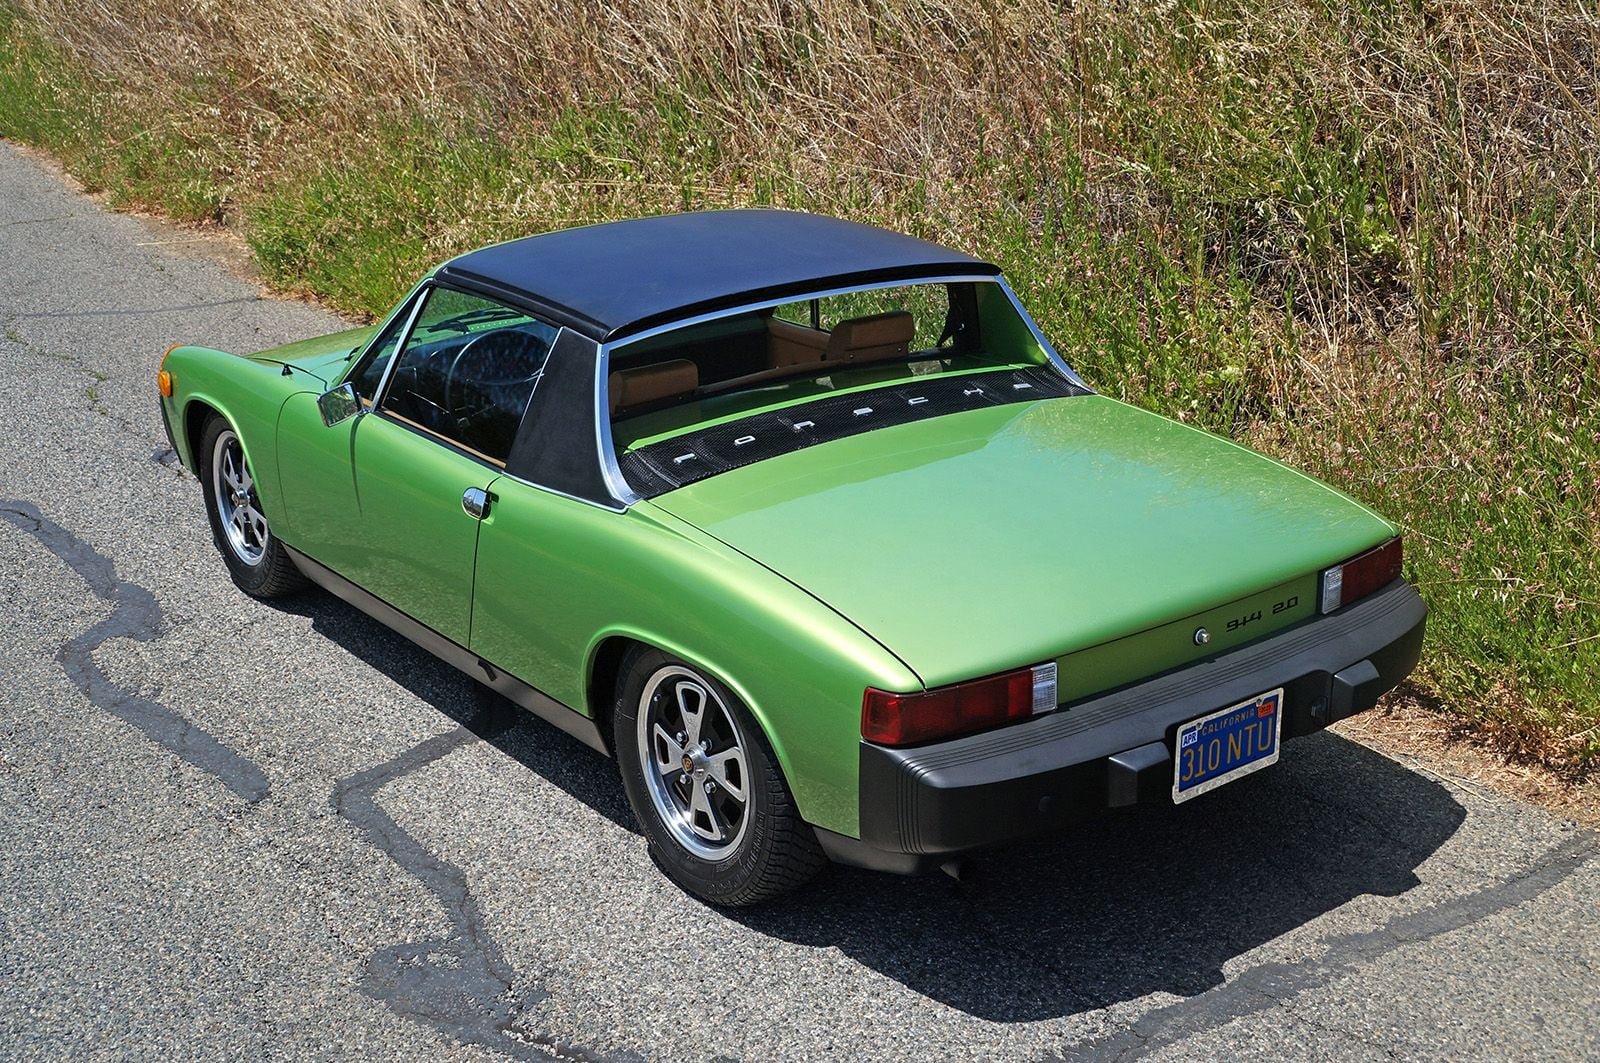 1976 Porsche 914 - 1976 Porsche 914 2.0 - Lime Green Metallic, Extremely Clean, Dry, CA Example - Used - VIN 4762902060 - 103,950 Miles - 4 cyl - 2WD - Manual - Other - Santa Barbara, CA 93105, United States